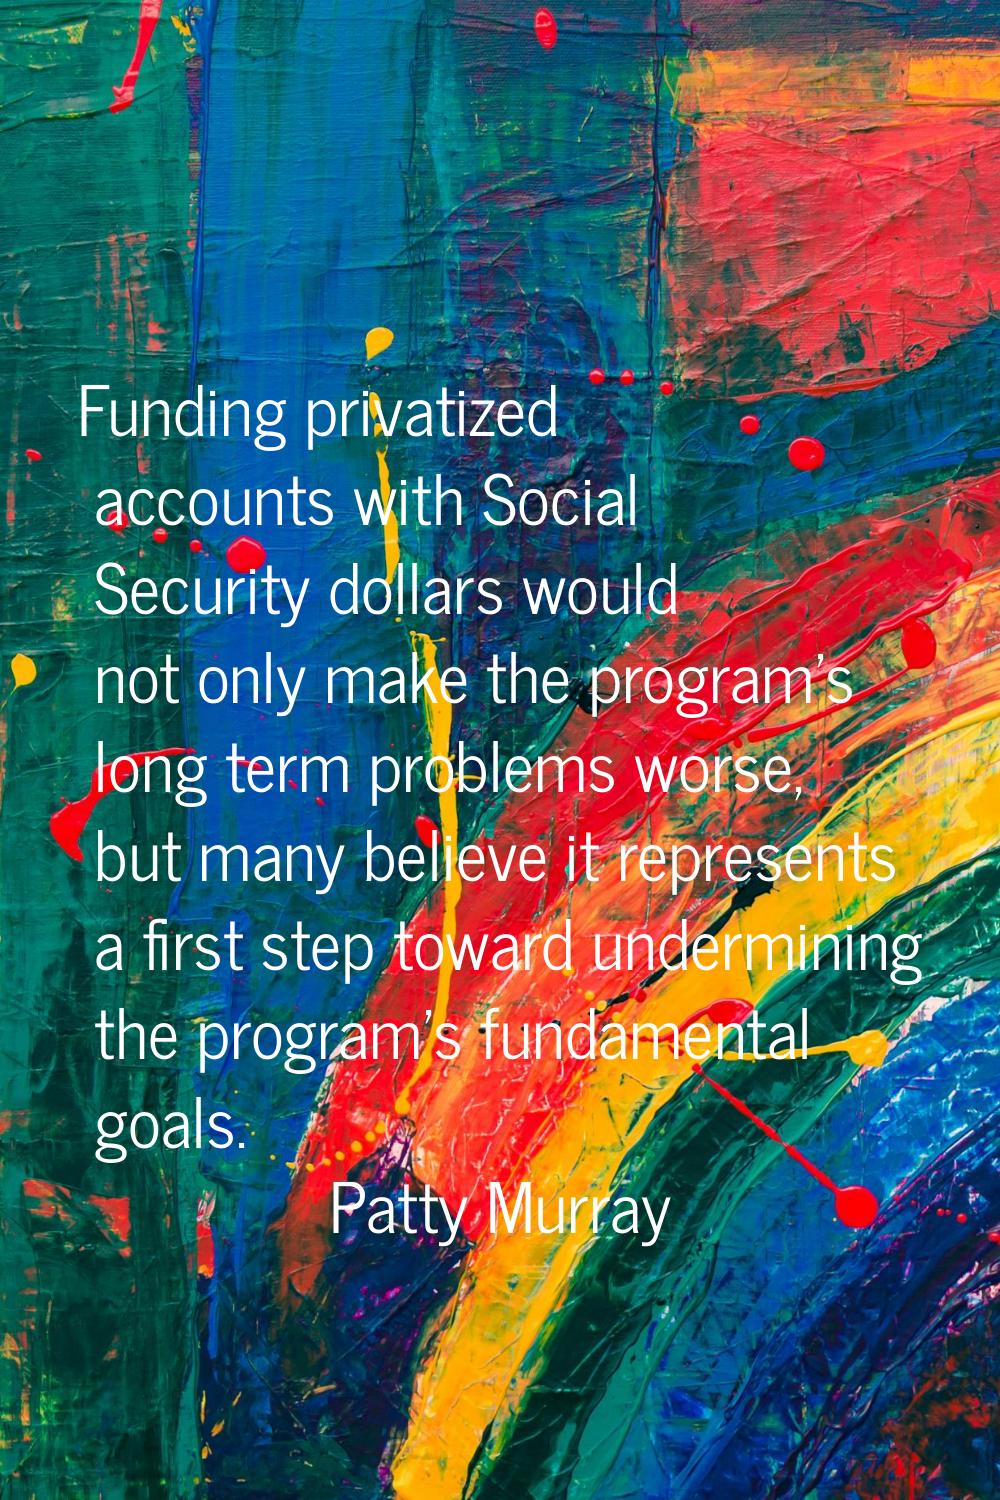 Funding privatized accounts with Social Security dollars would not only make the program's long ter